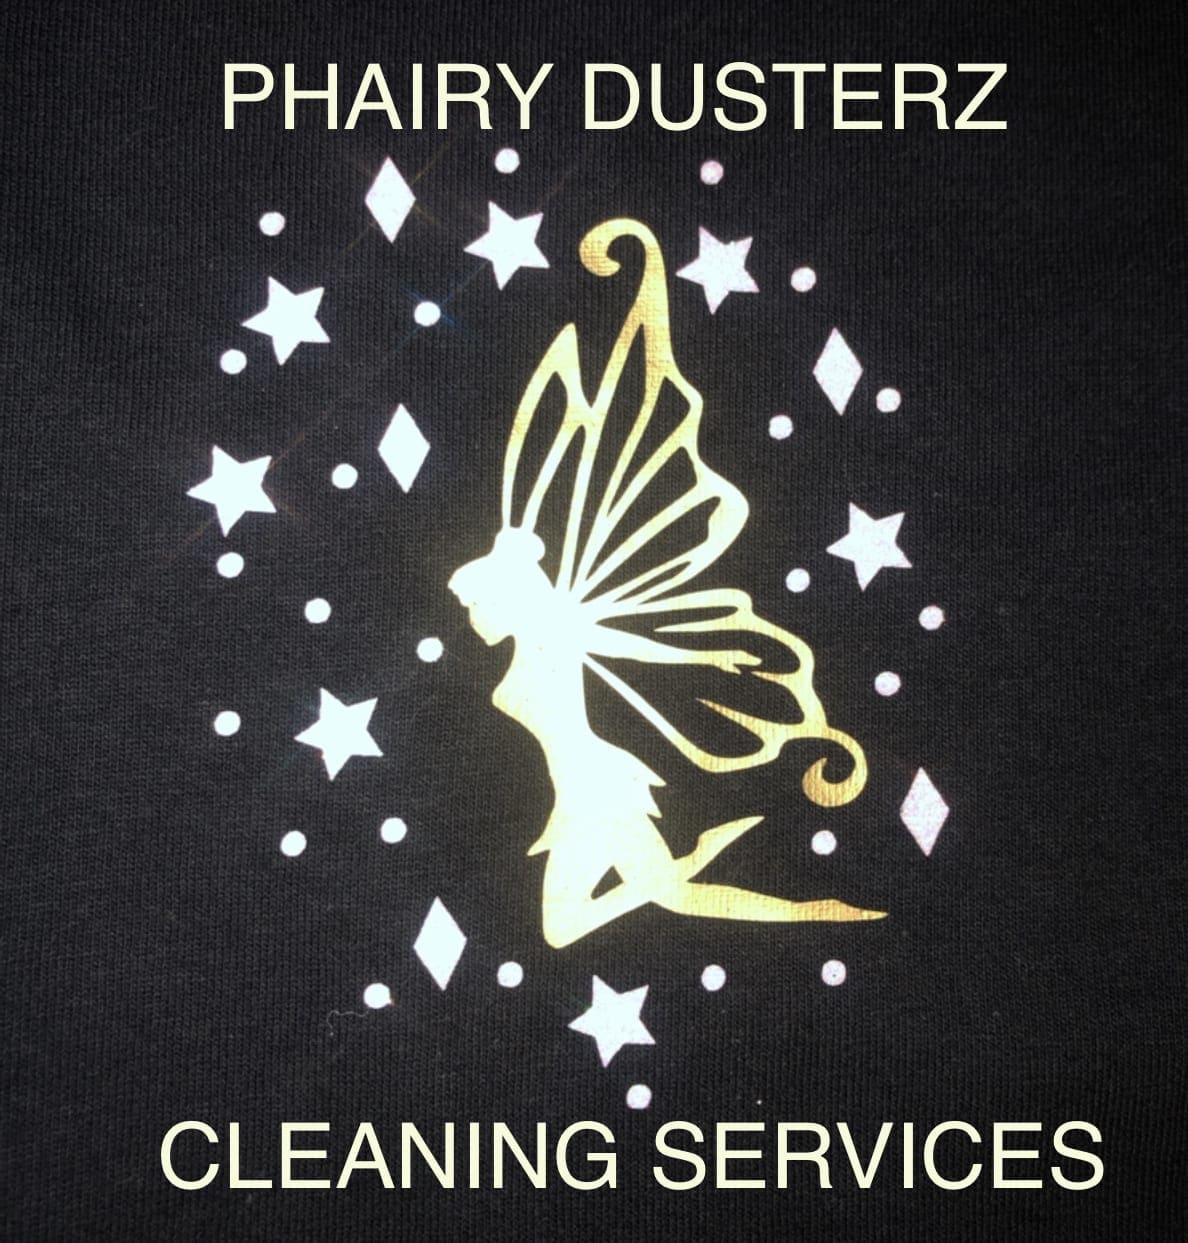 Phairy Dusterz Cleaning Services LLC